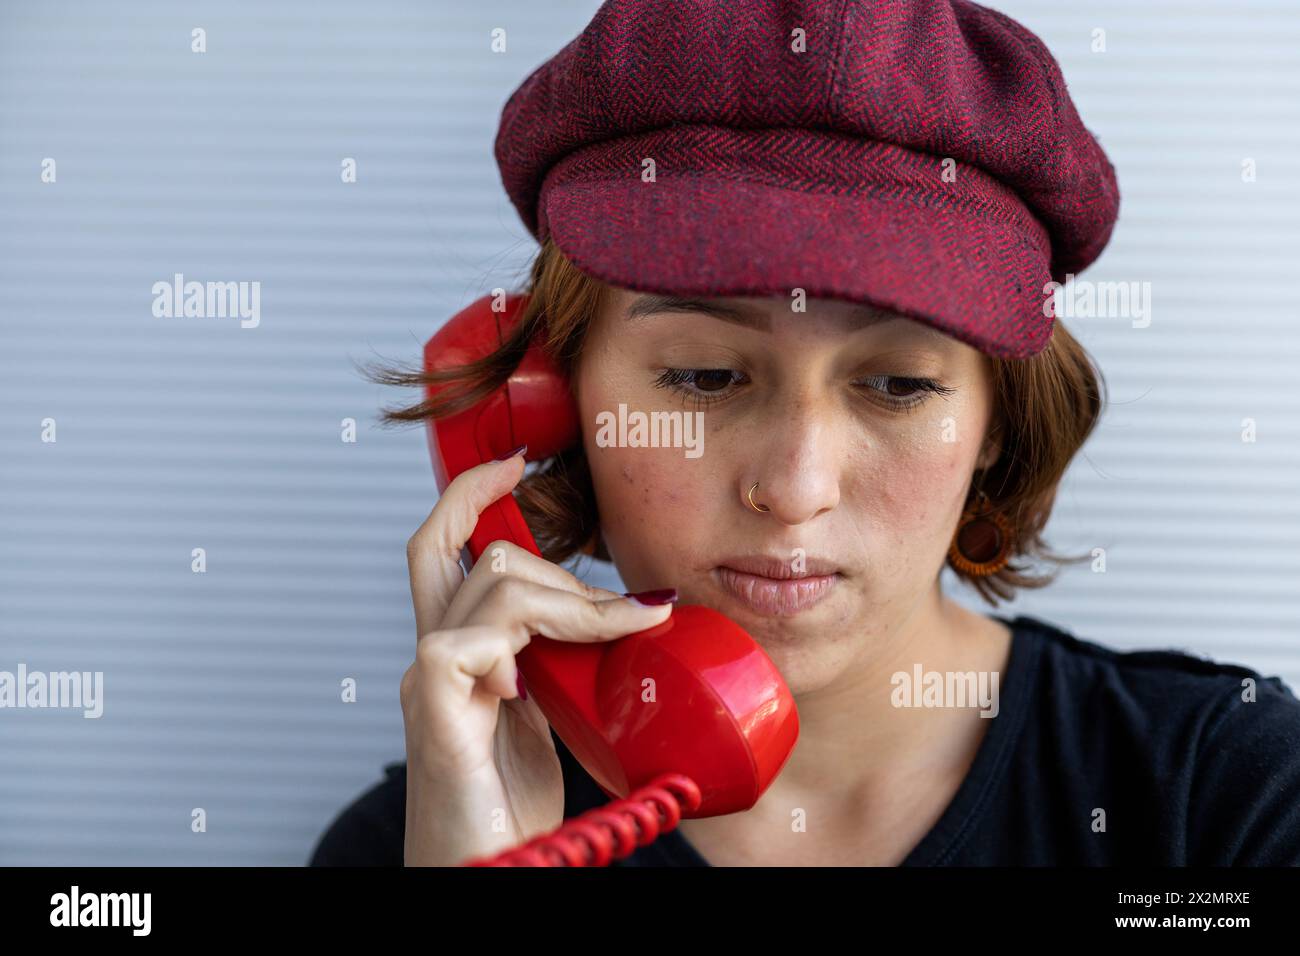 Medium short shot of Latin American young woman (22) with cap and red hair listening to conversation on retro red Handset. Low angle shot. Vintage tec Stock Photo